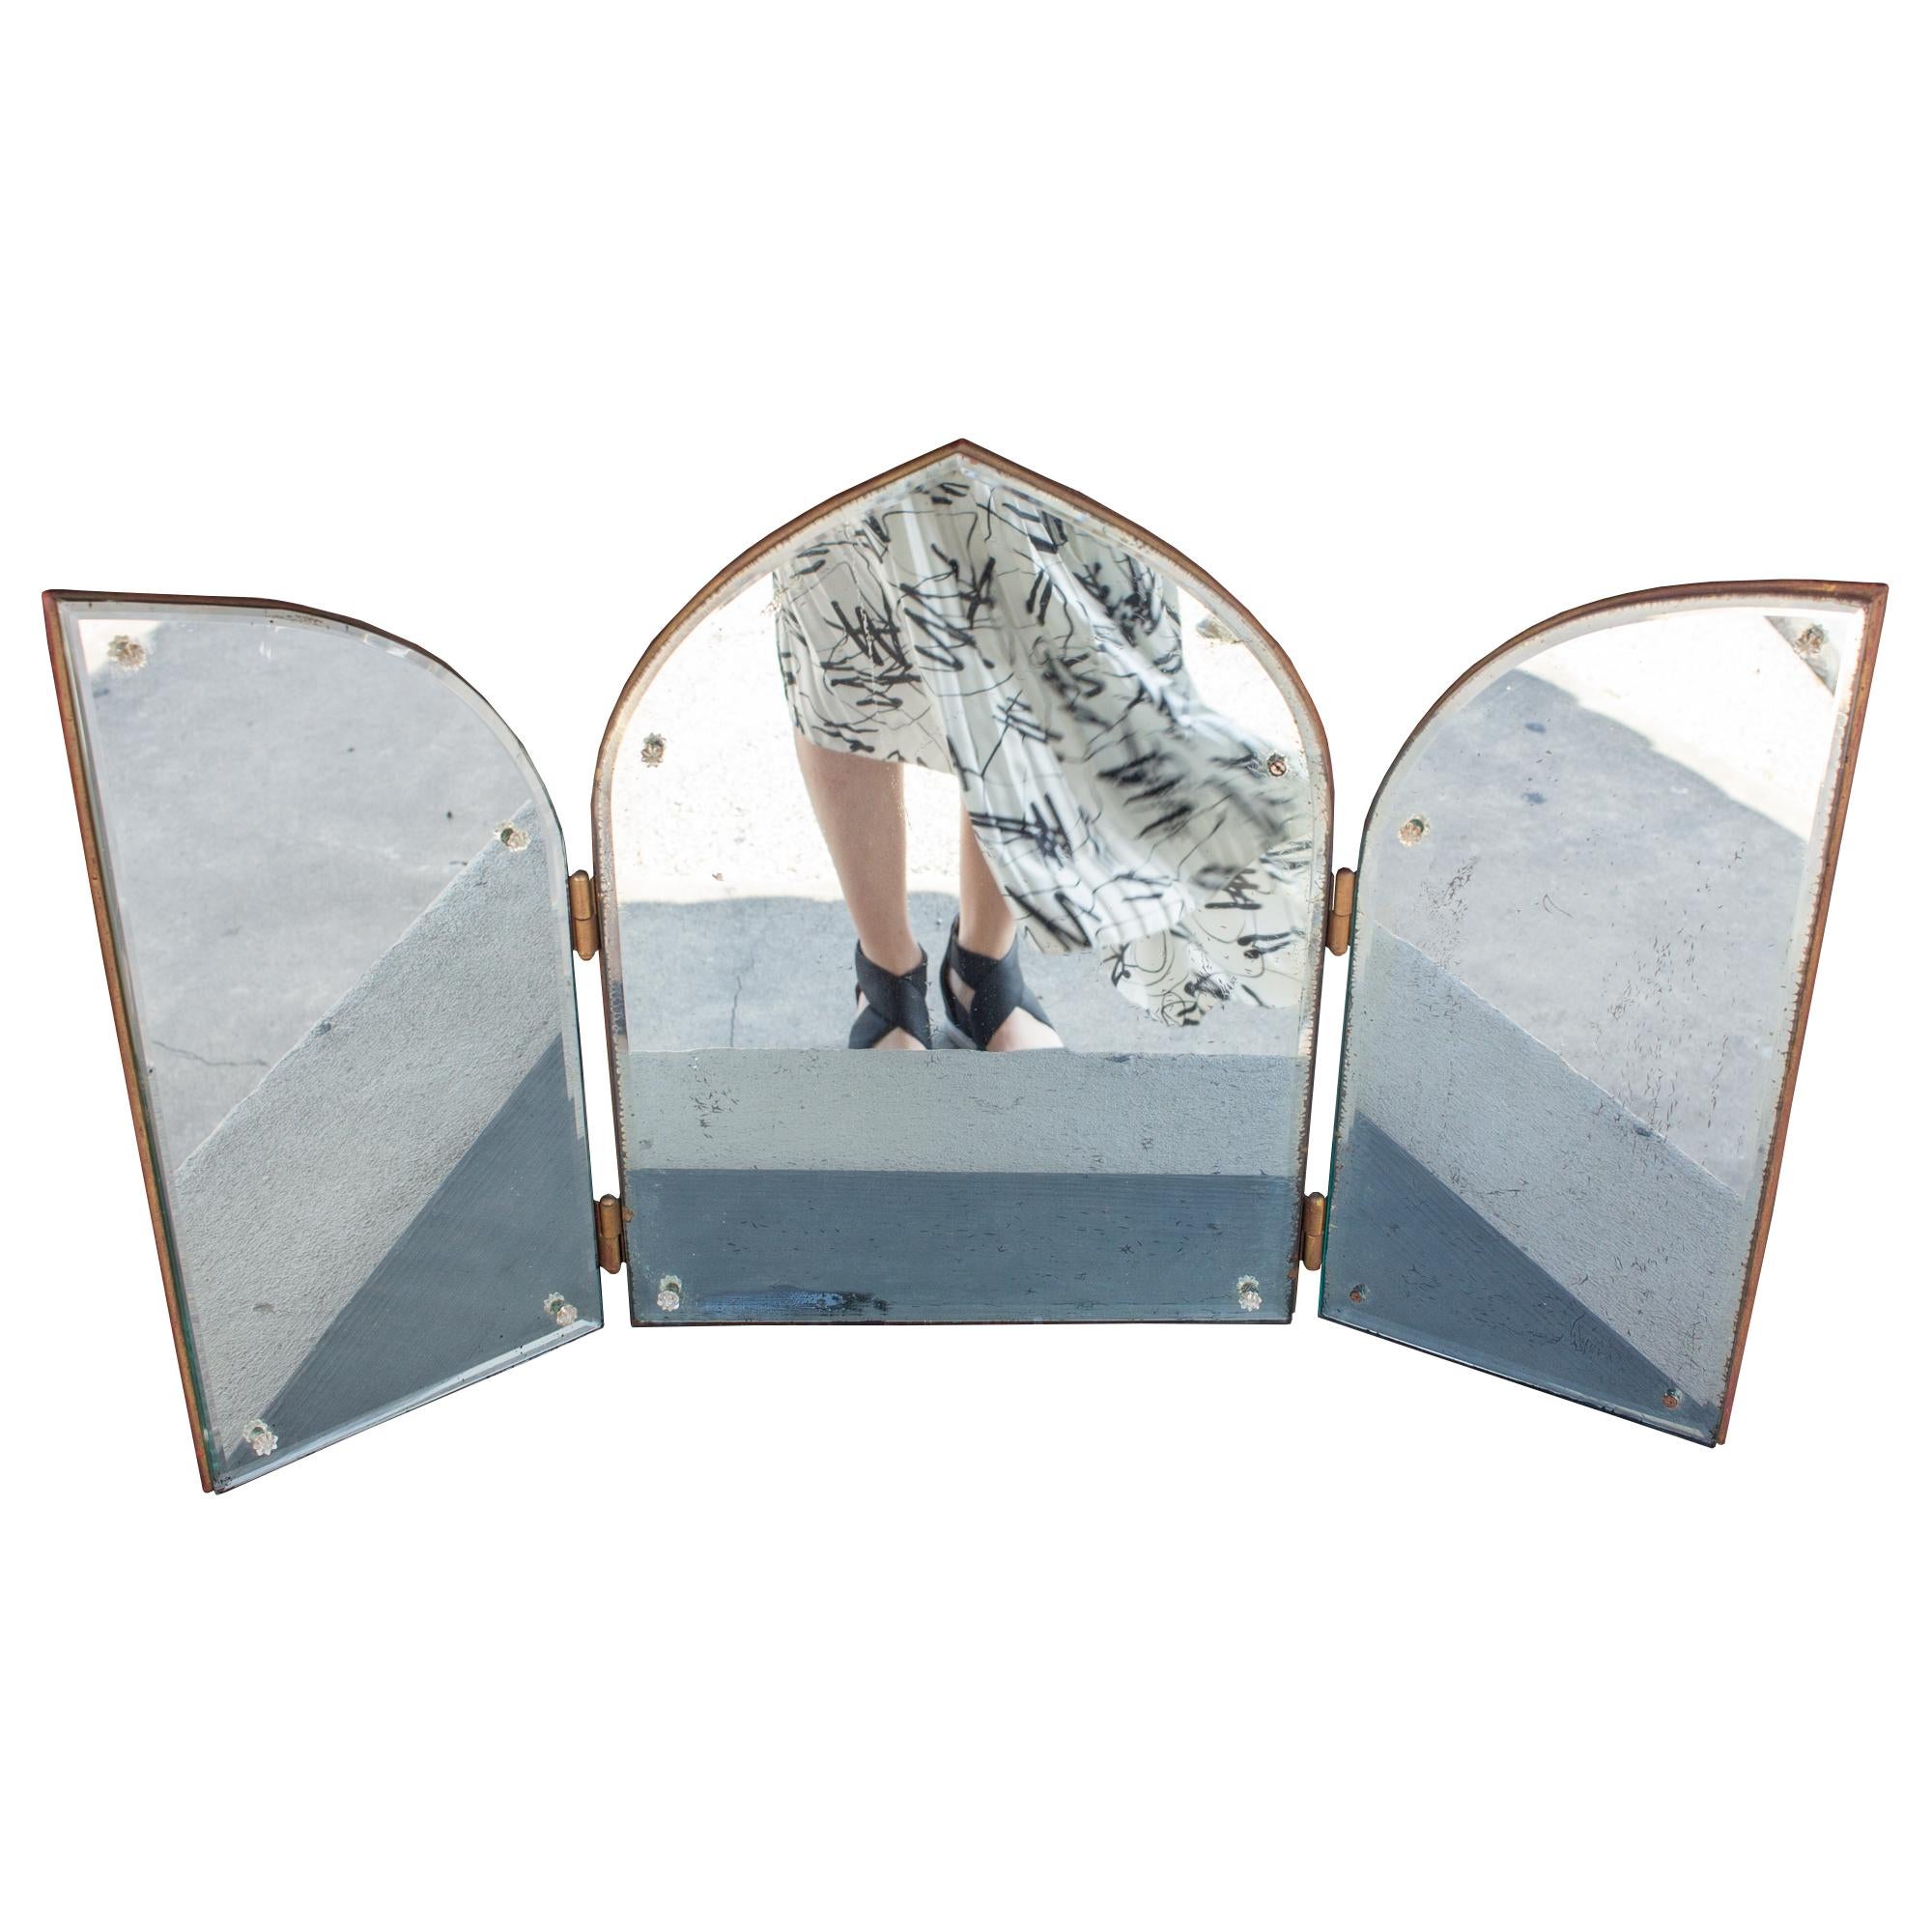 This 1940s triptych mirror has three panels, hinged together. The shape is arched and features a beveled edge on all three mirror panels with clear decorative caps on the screws (9 of 12 are intact). The back of the mirror is wood and has been